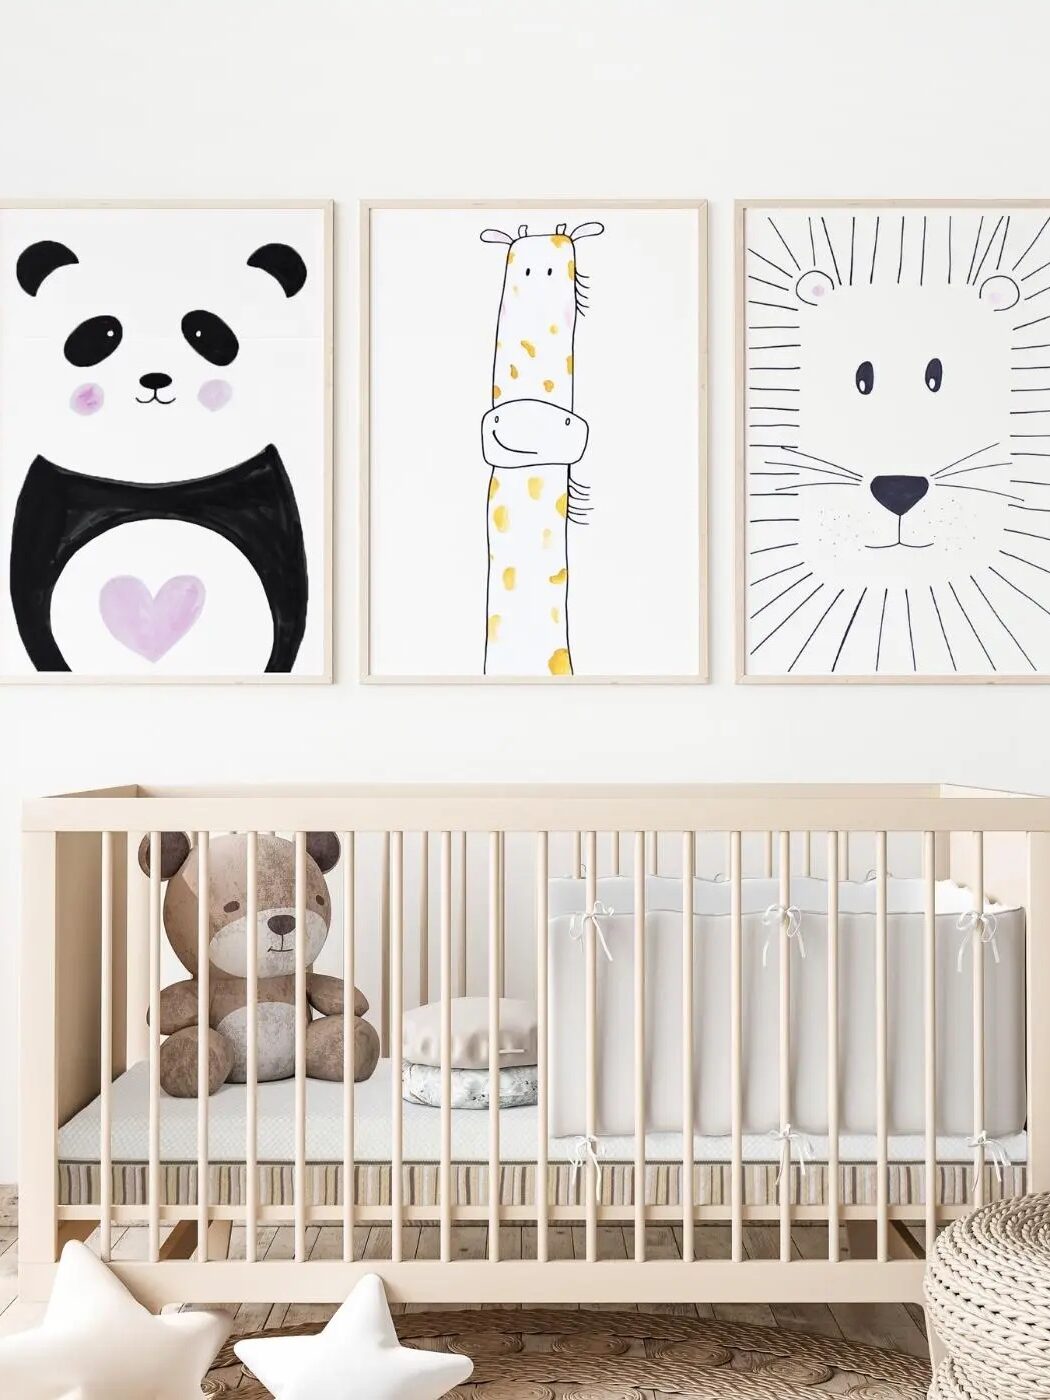 The Essentia Crib Mattress in a crib frame with toys and framed animal illustrations above it.